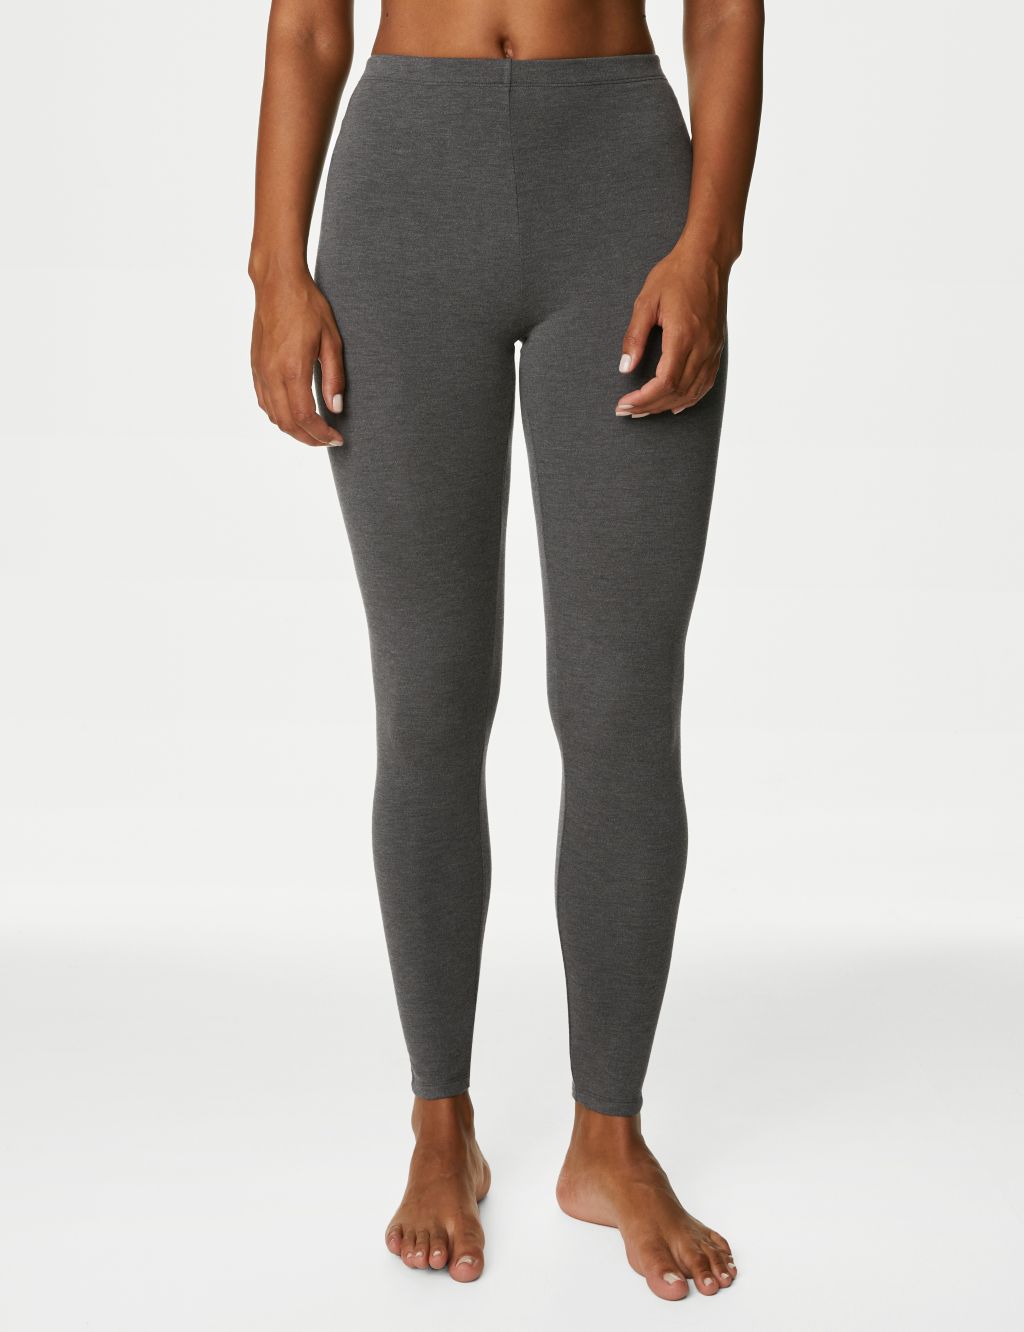 M&S Collection Leggings  Heatgen Plus™ Thermal Brushed Leggings Navy -  Womens ⋆ Toddling Togs